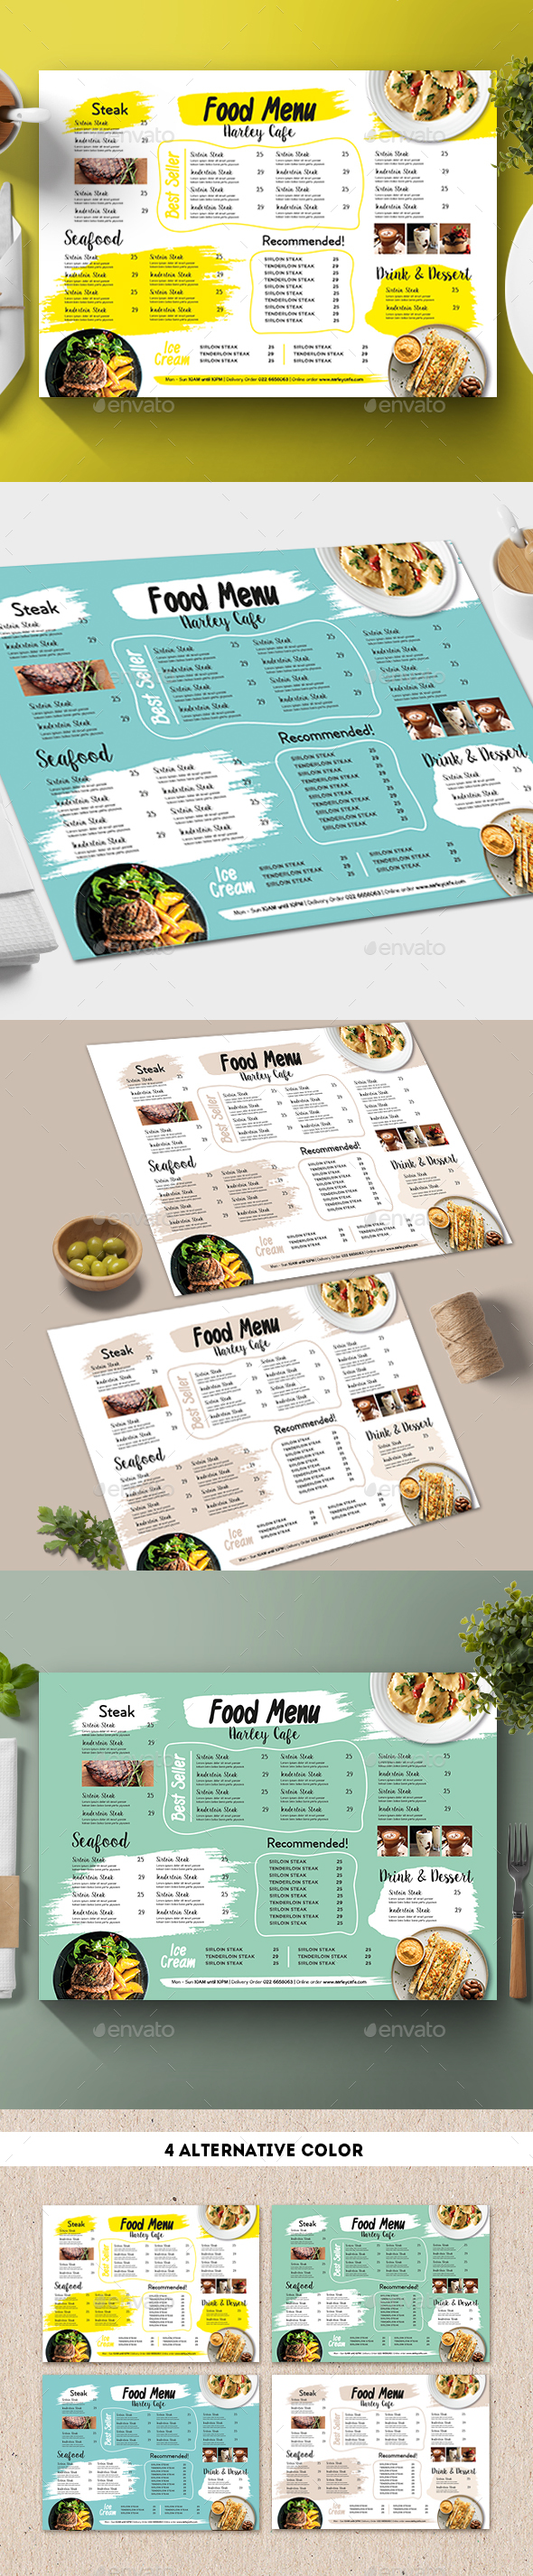 Modern Menu Stationery And Design Templates From Graphicriver